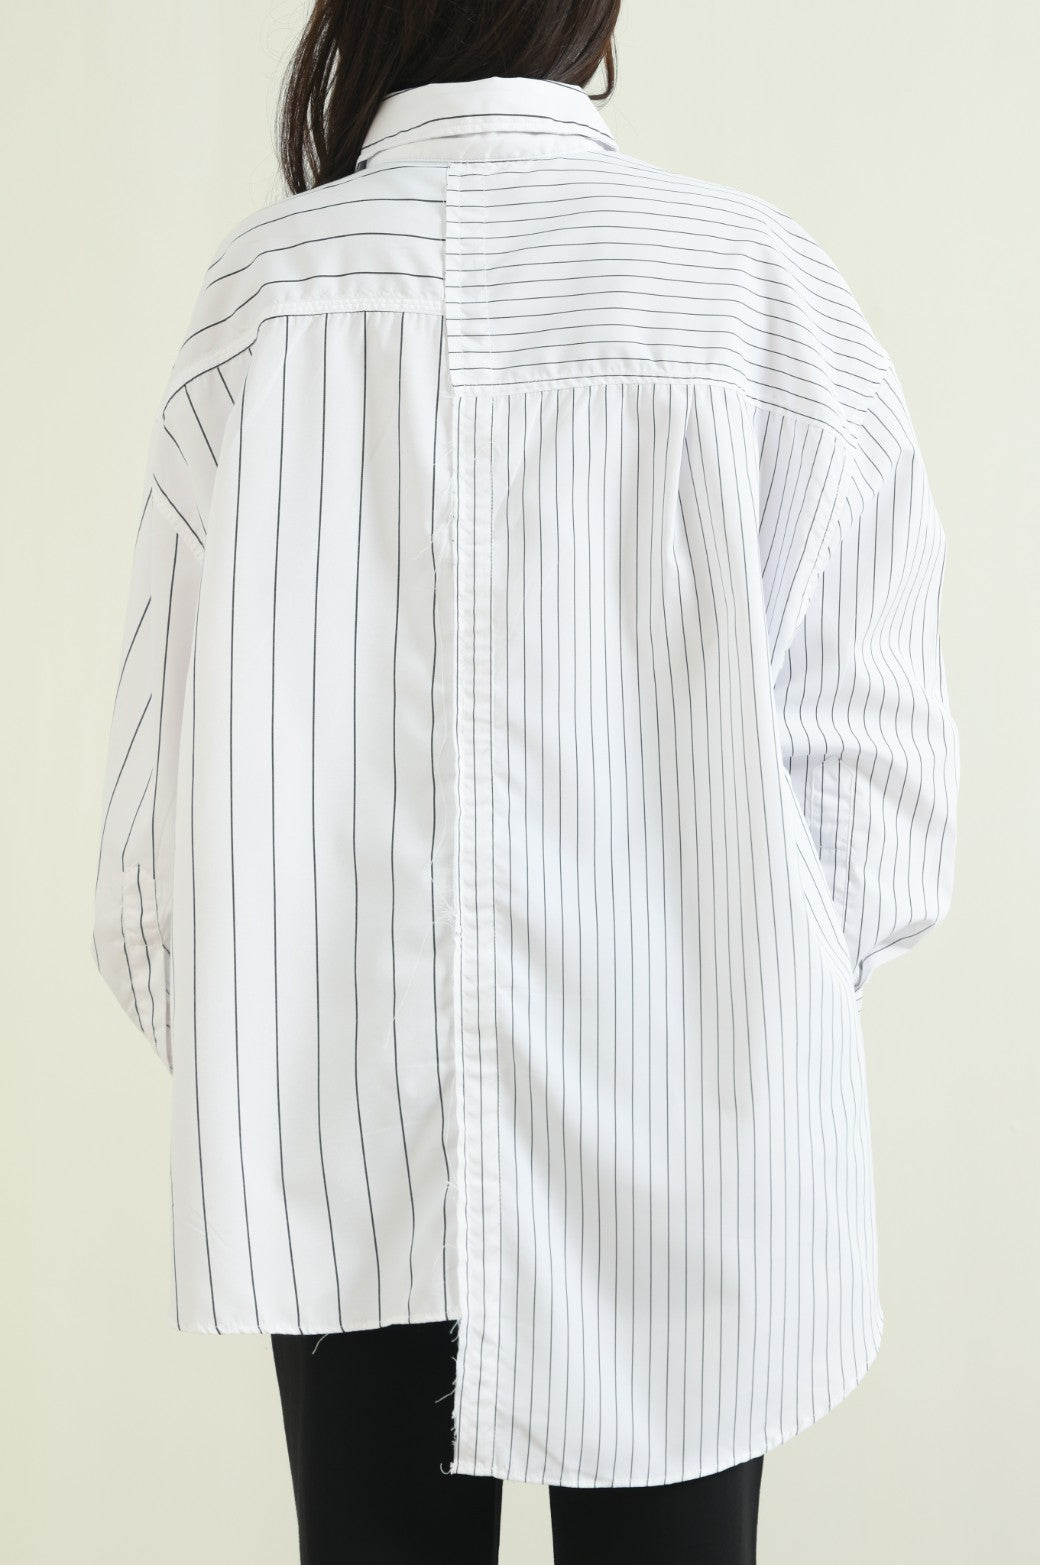 ABSTRACT STRIPED SHIRT